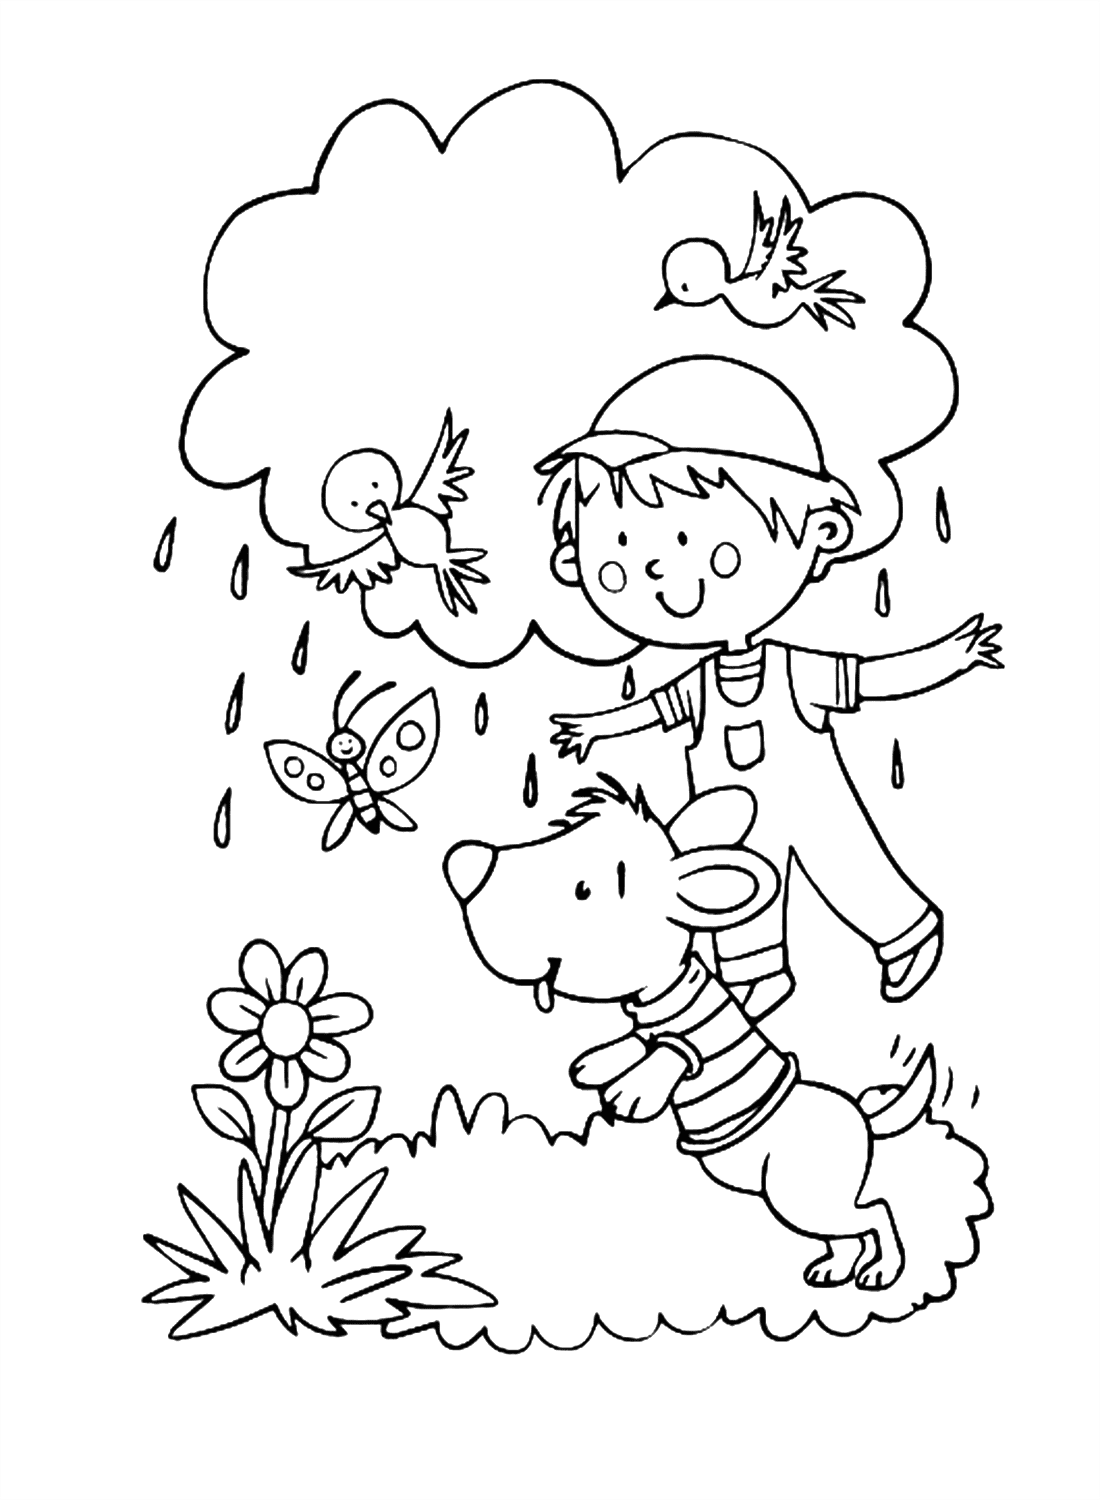 A Boy And A Dog Playing Outside from Spring